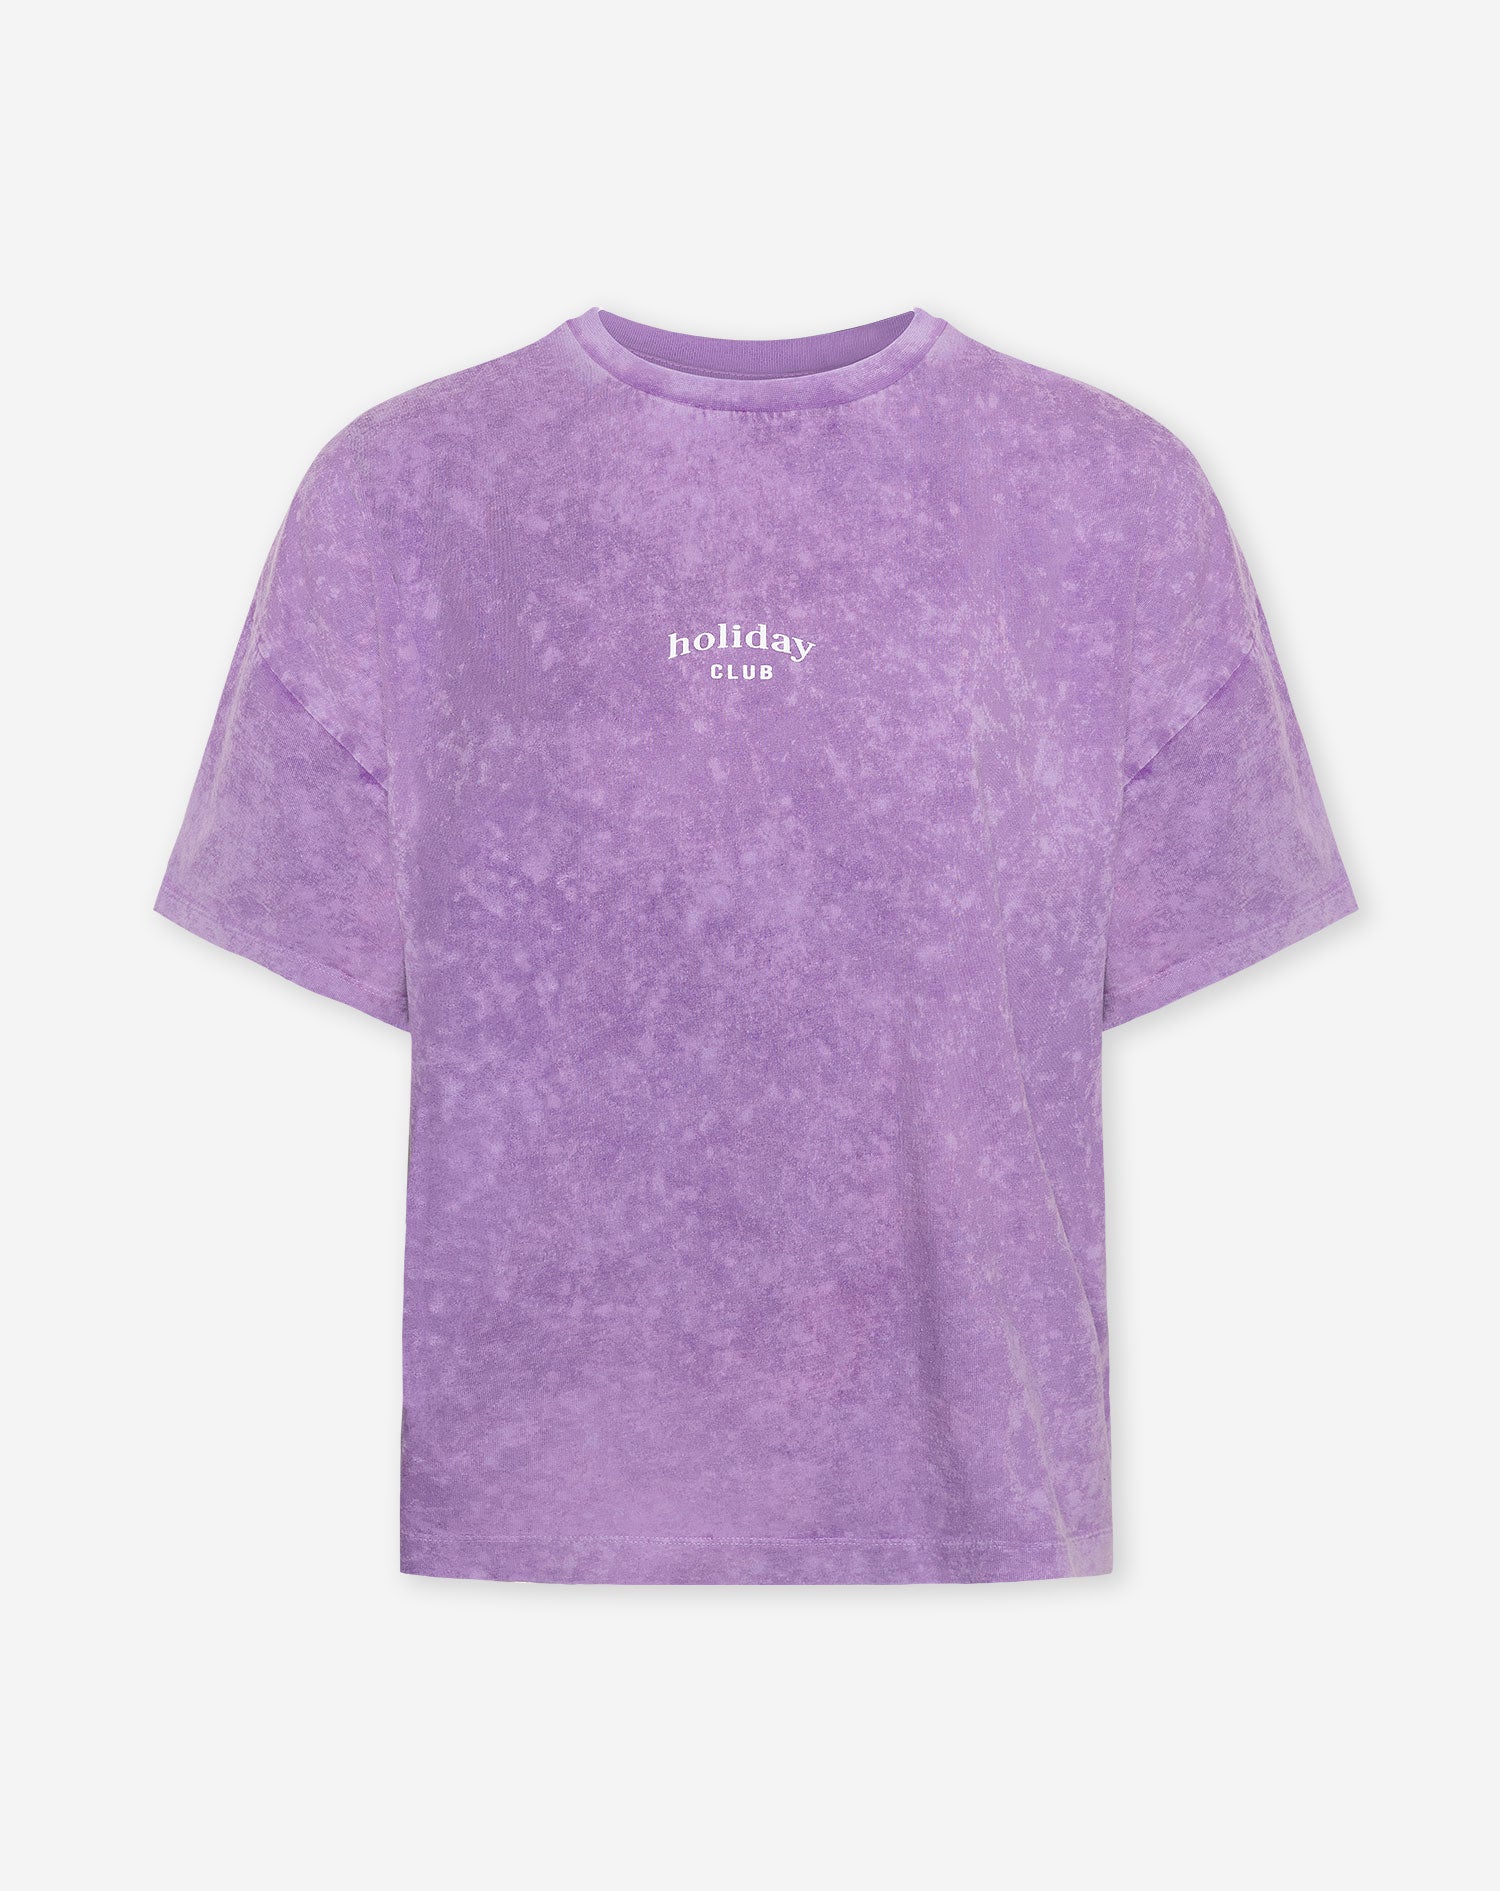 HOLIDAY CLUB OVERSIZED TEE LILAC